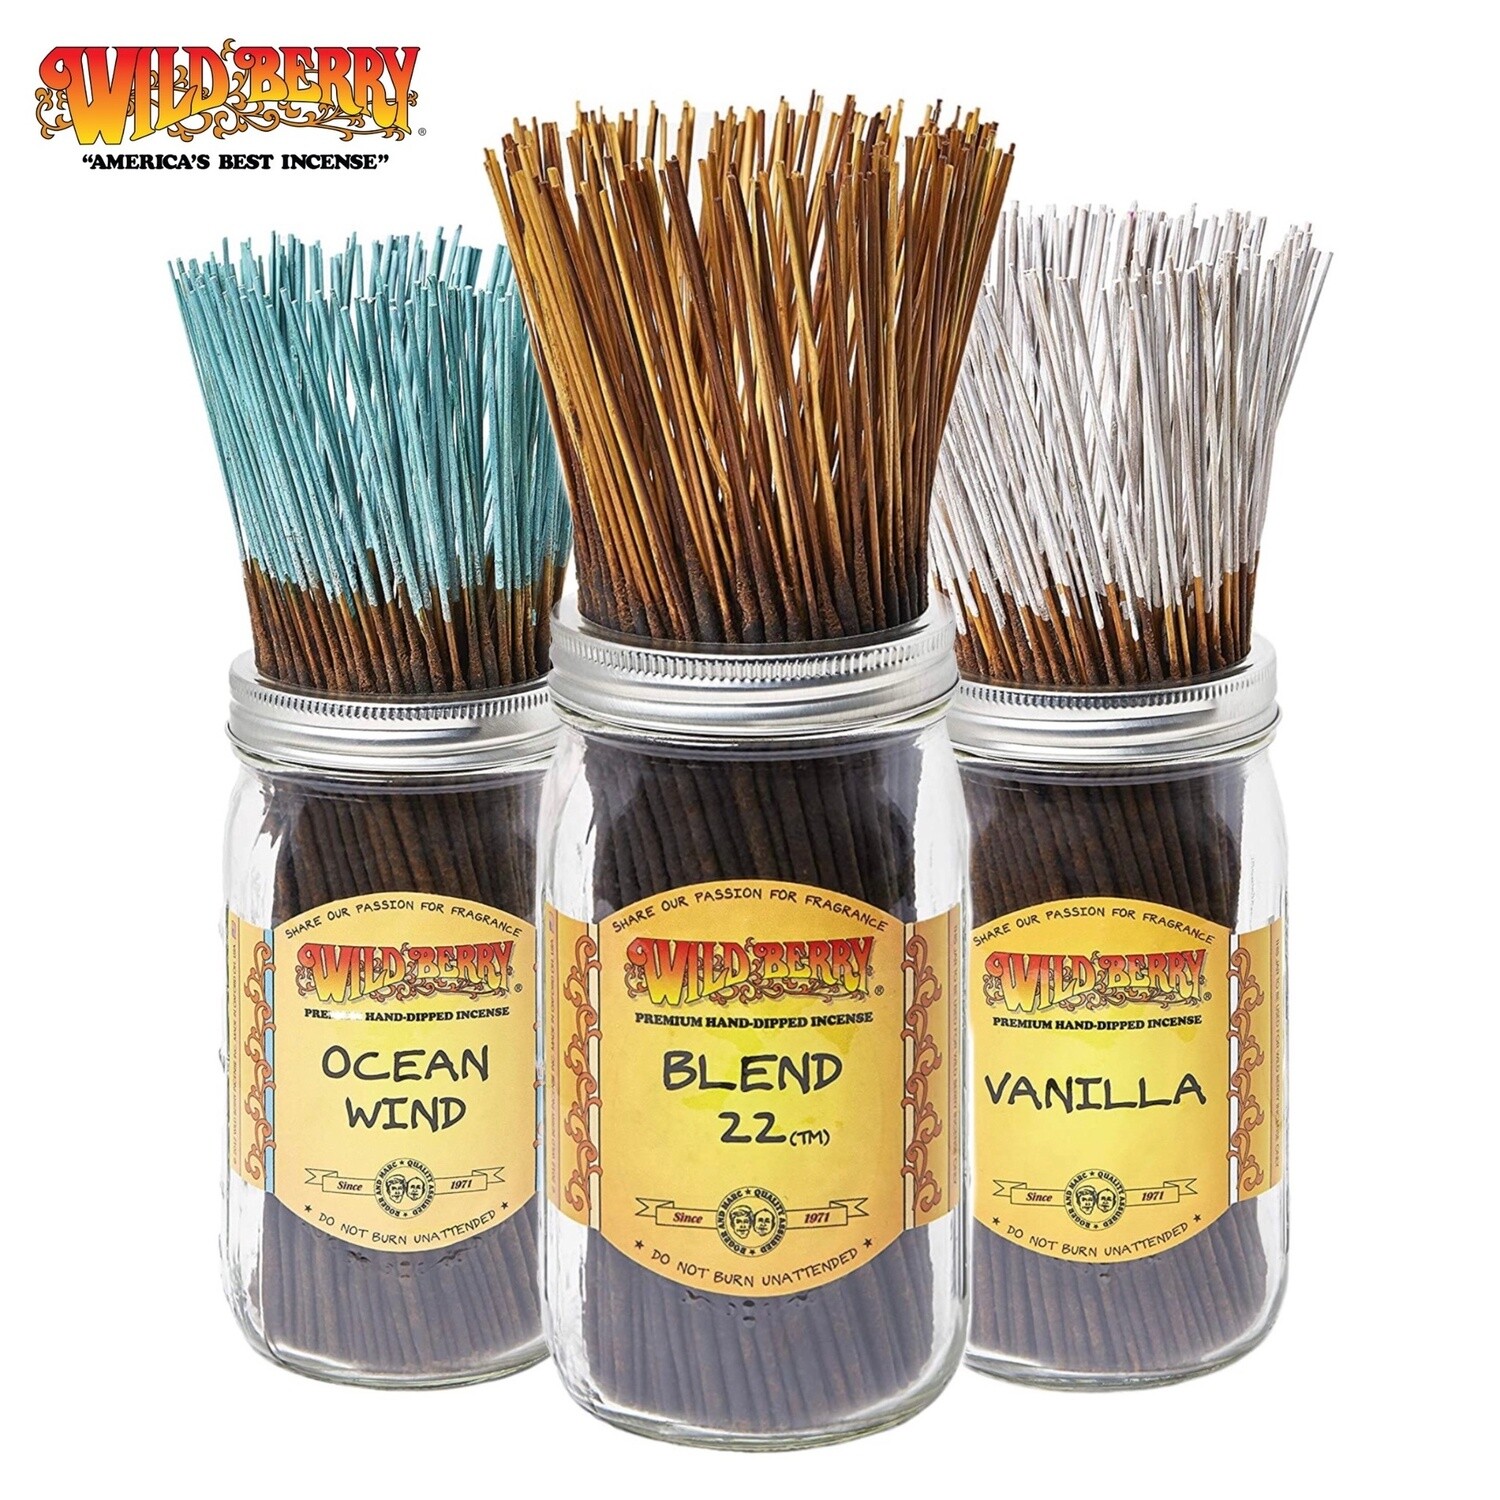 Wild Berry® Incense (30 pack)